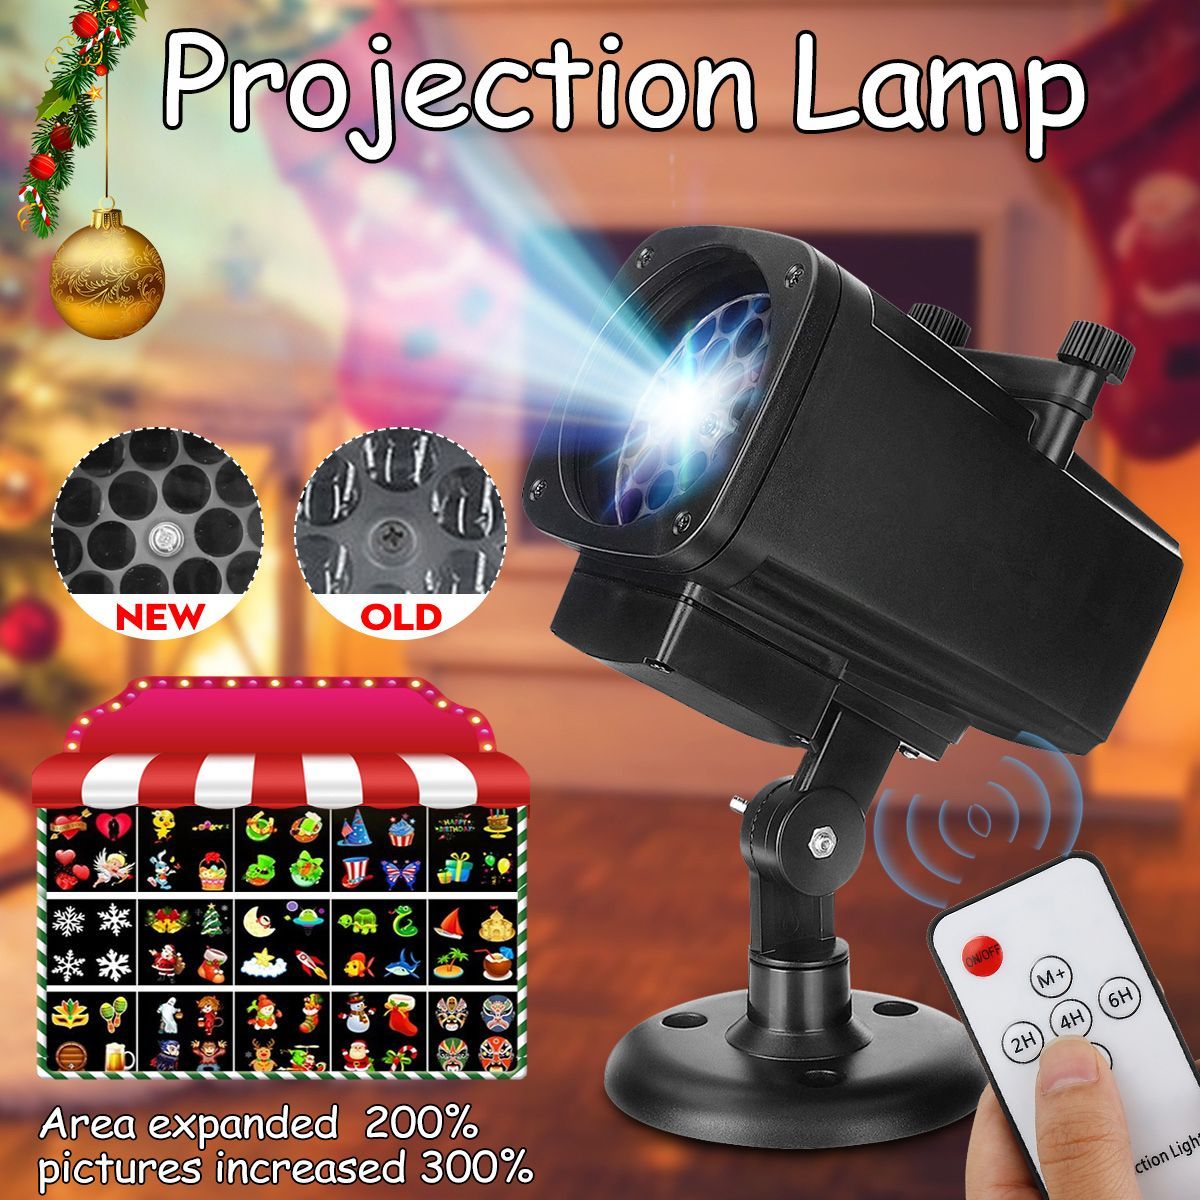 18-in-1-Projection-Lamp-Projector-Christmas-Halloween-Outdoor-Landscape-Garden-Party-Decorations-1574552